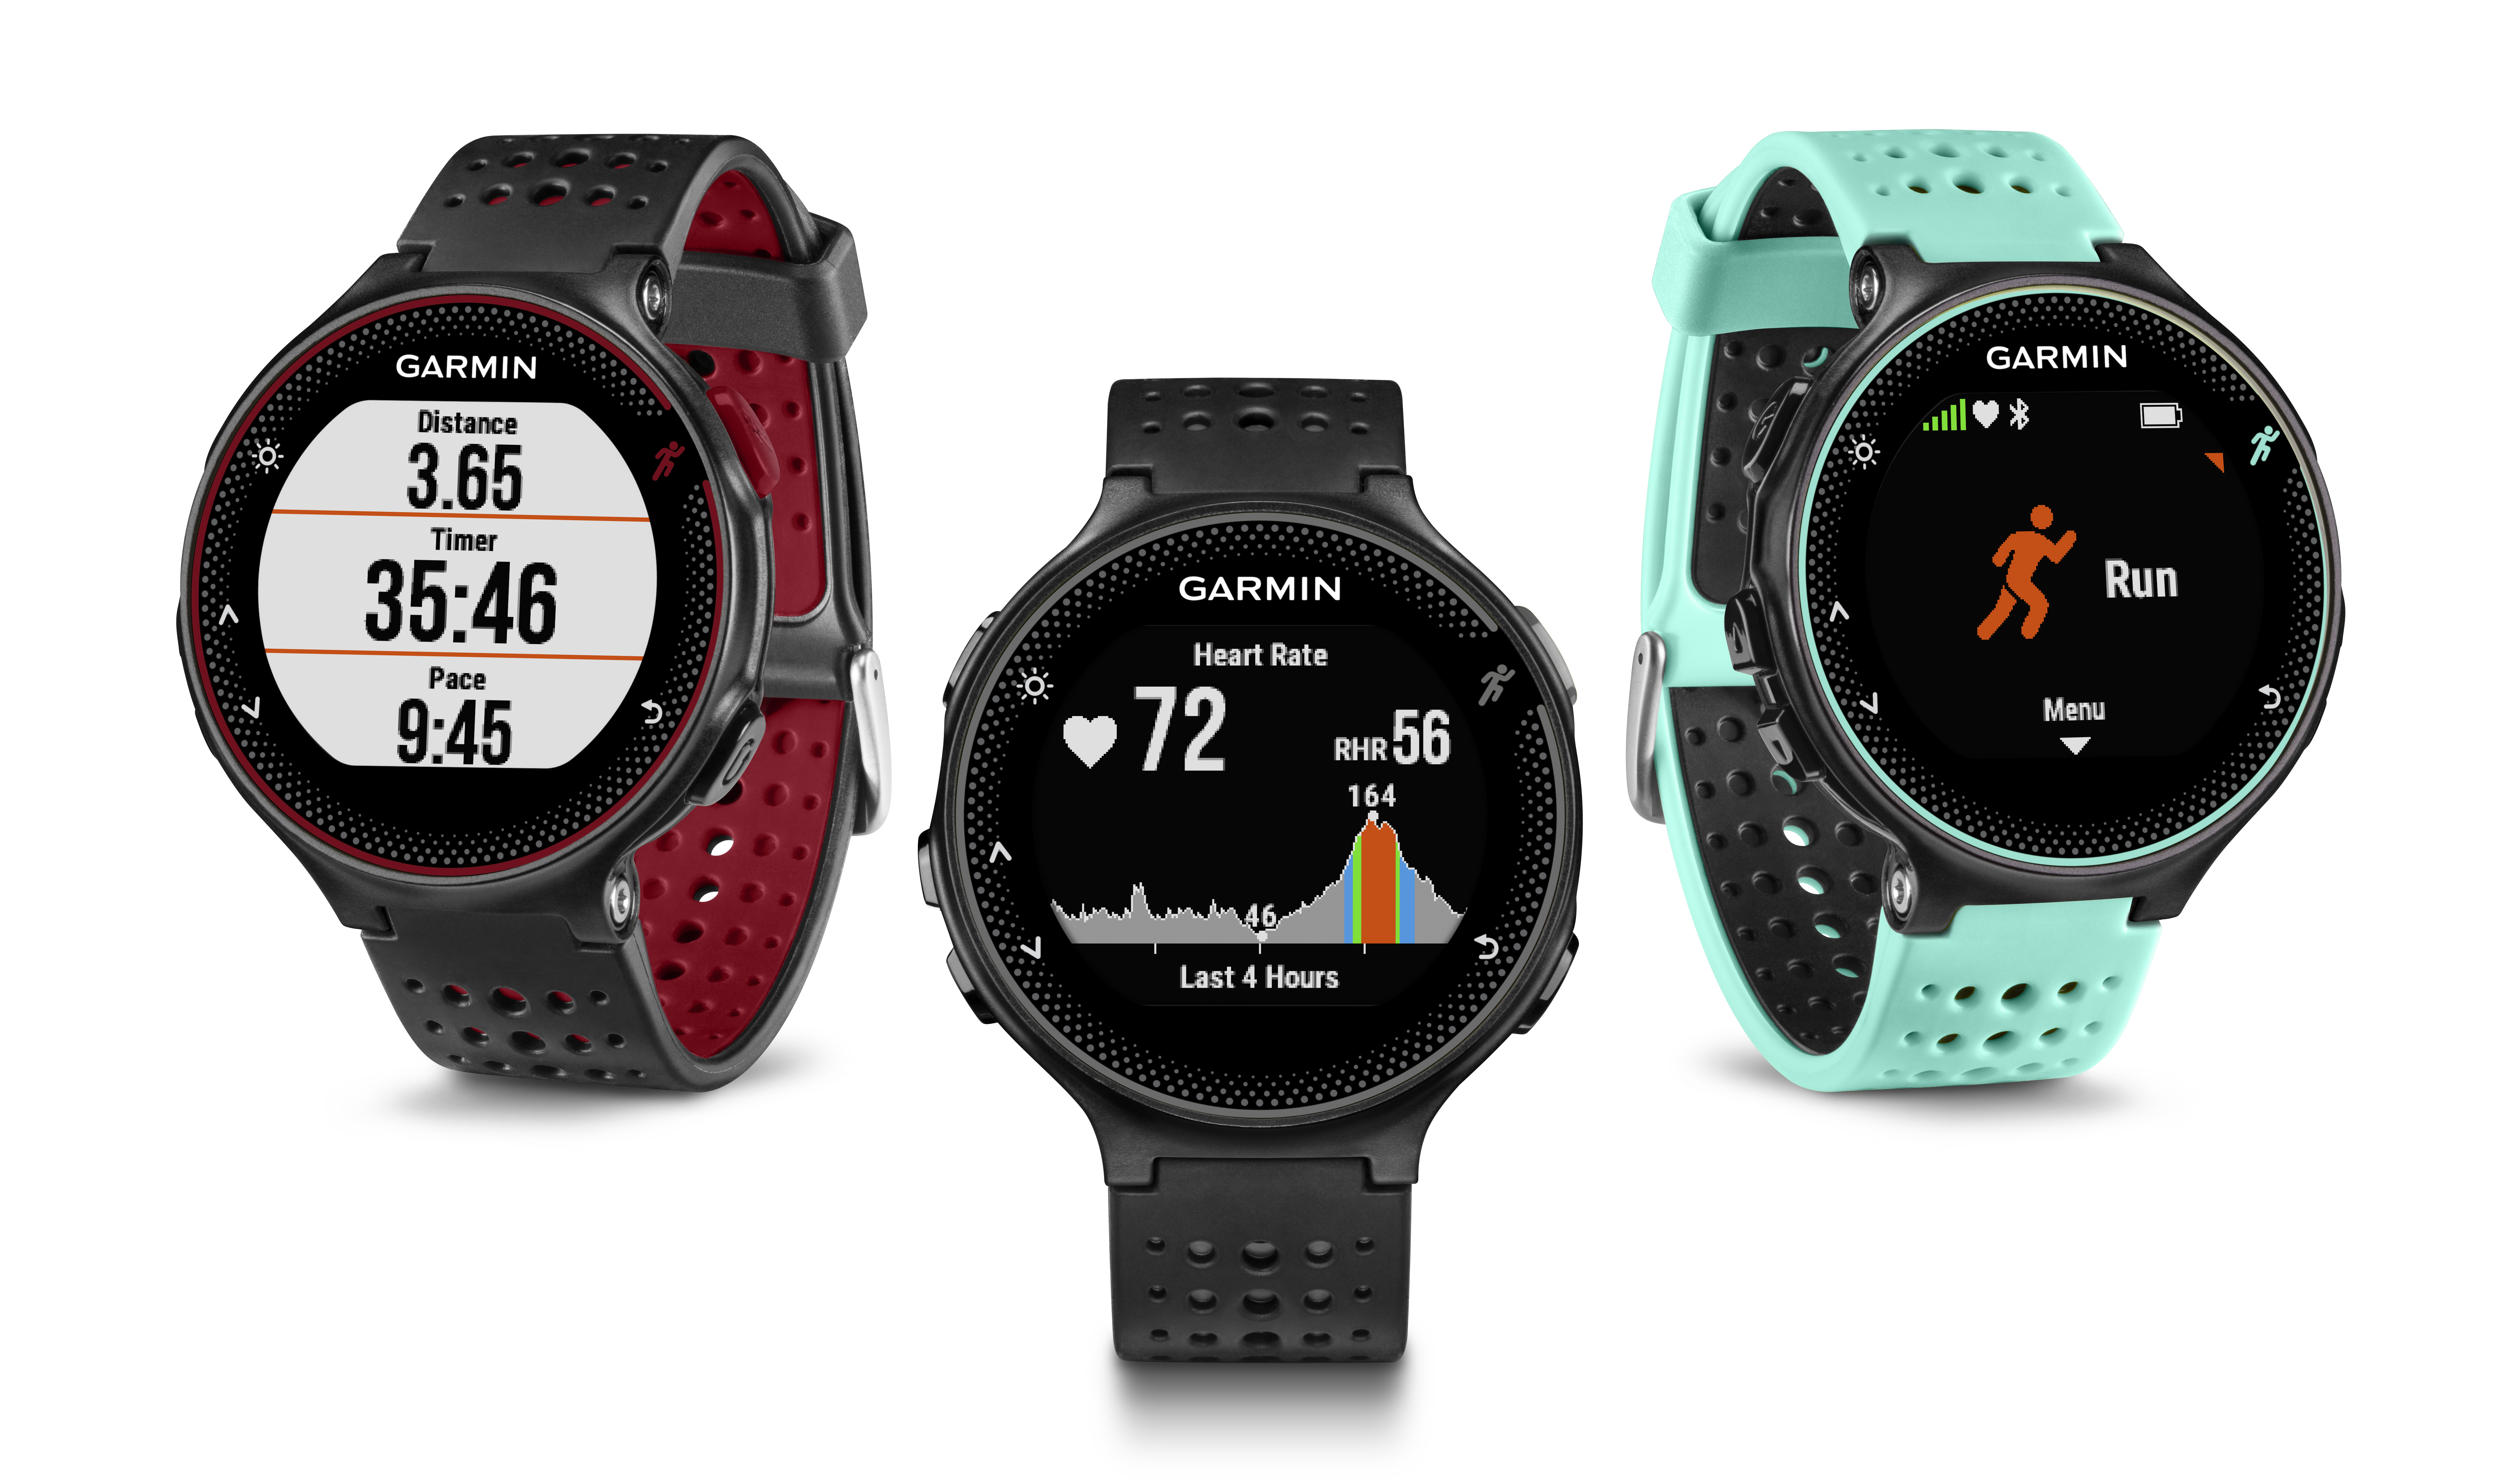 Train smarter with the latest GPS watches from Garmin – Introducing the Forerunner 230 and 235 Garmin Elevate wrist heart rate technology Garmin Blog